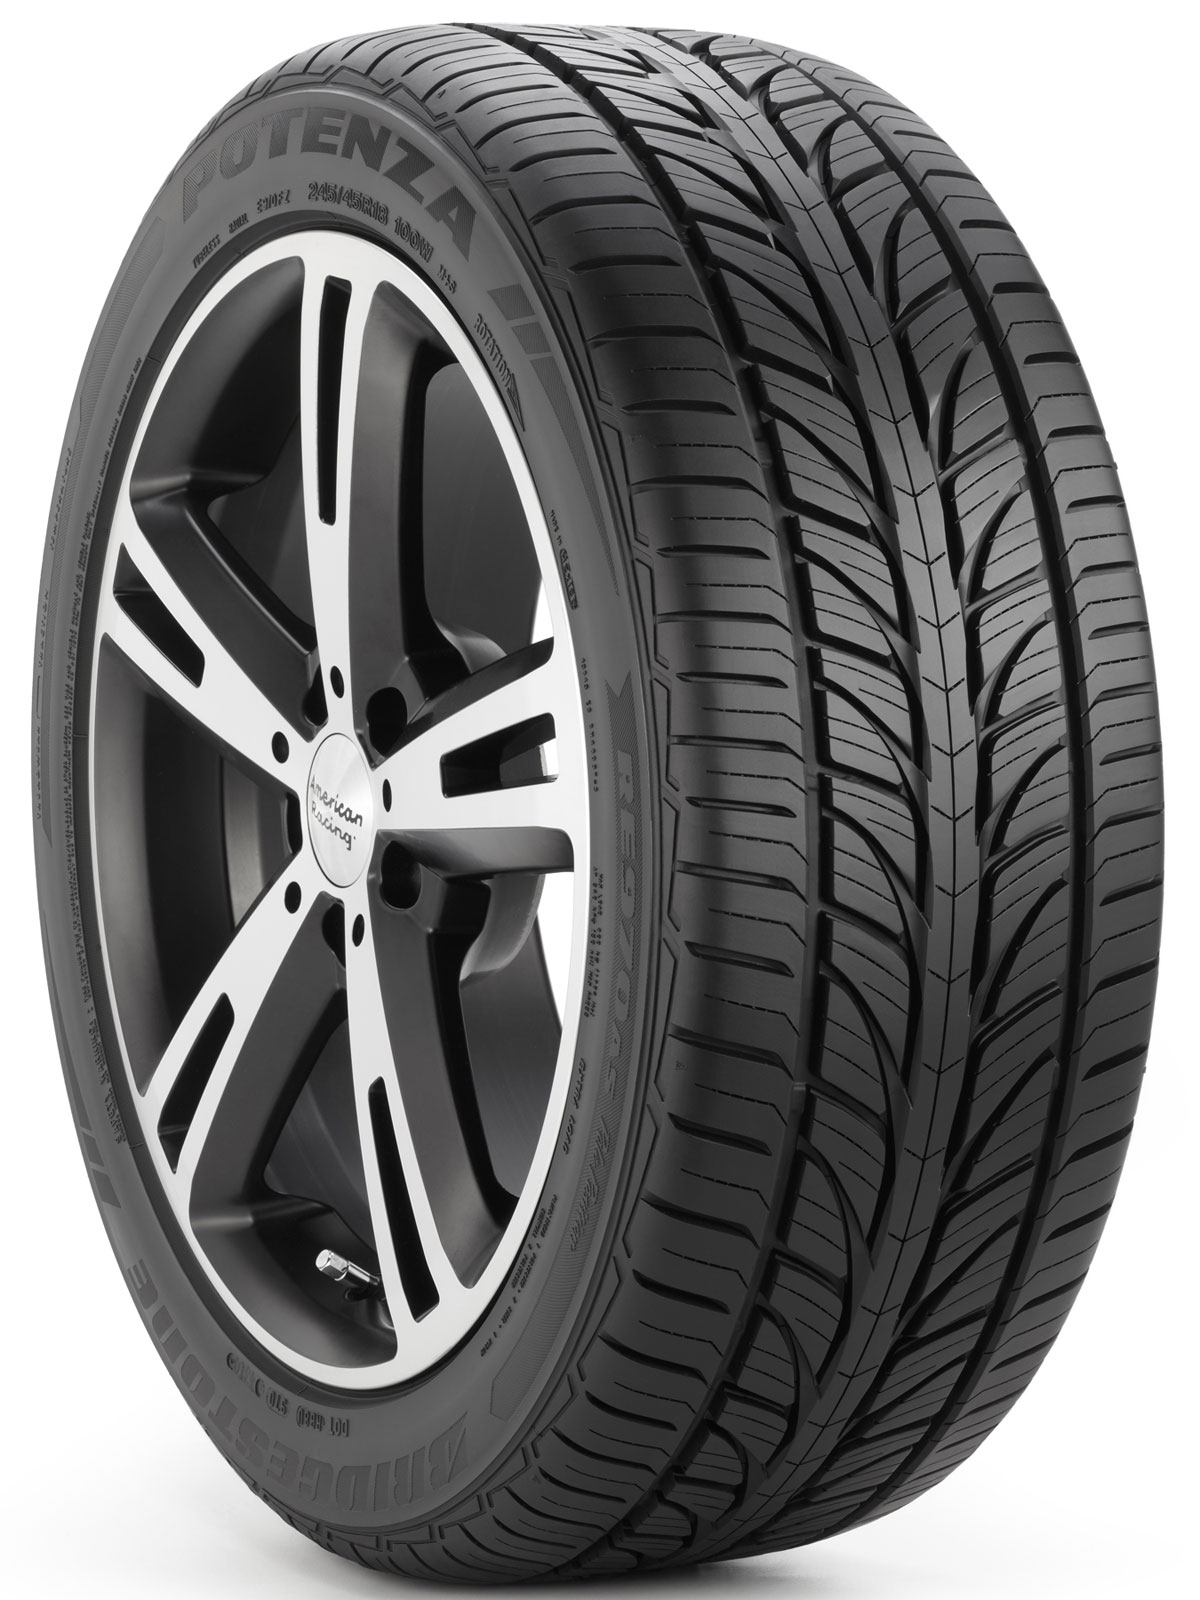 Tire and Wheels | Texas Electronics